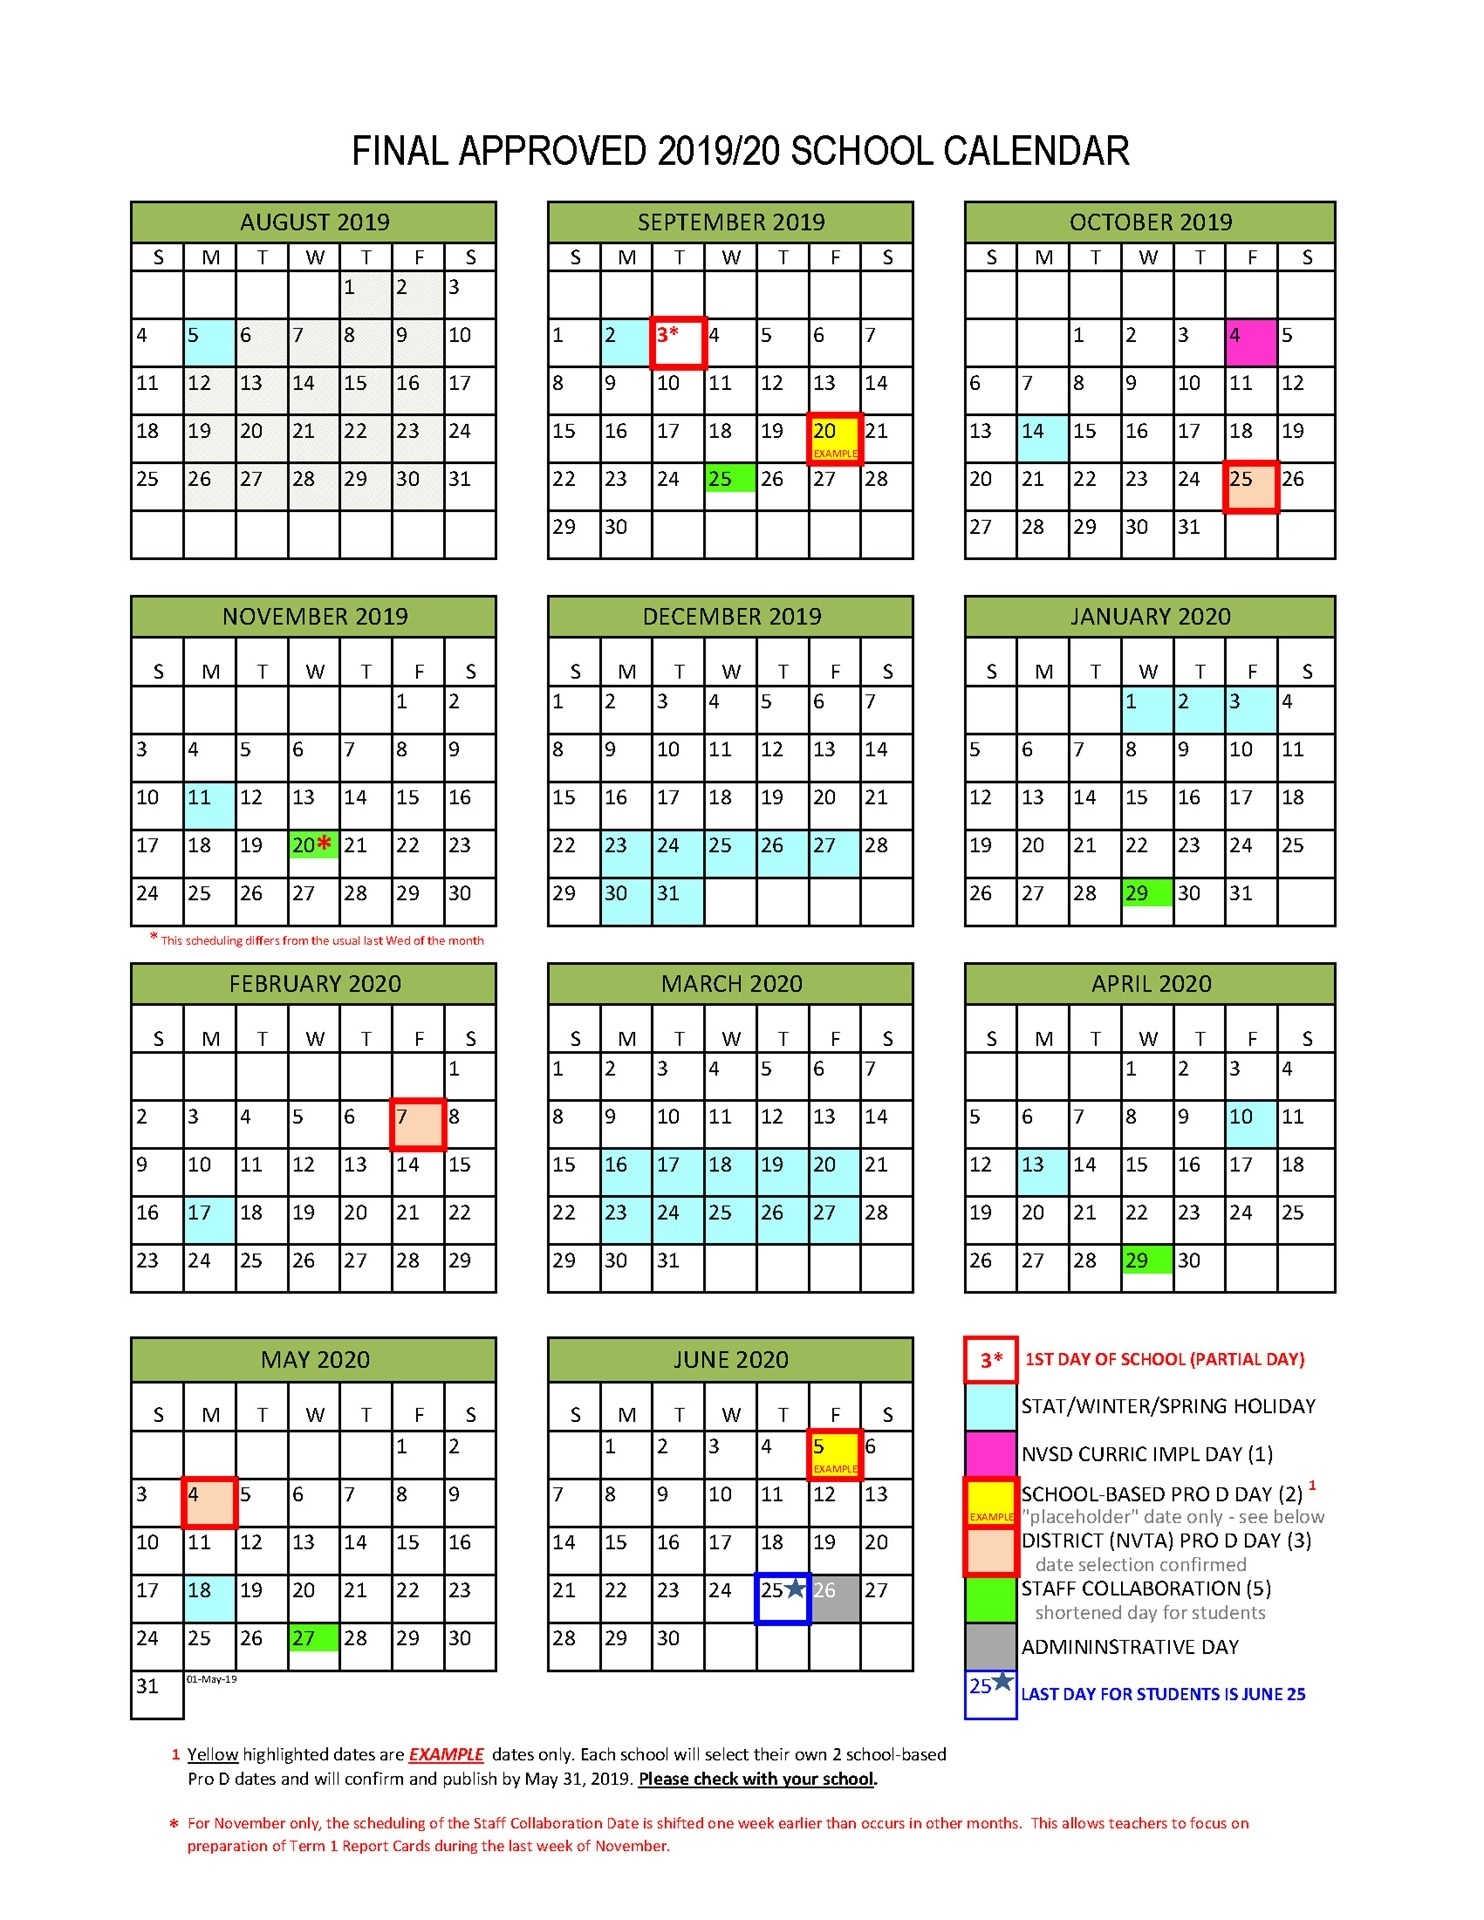 District Calendar - North Vancouver School District in Special Days For Schools 2019 - 2020